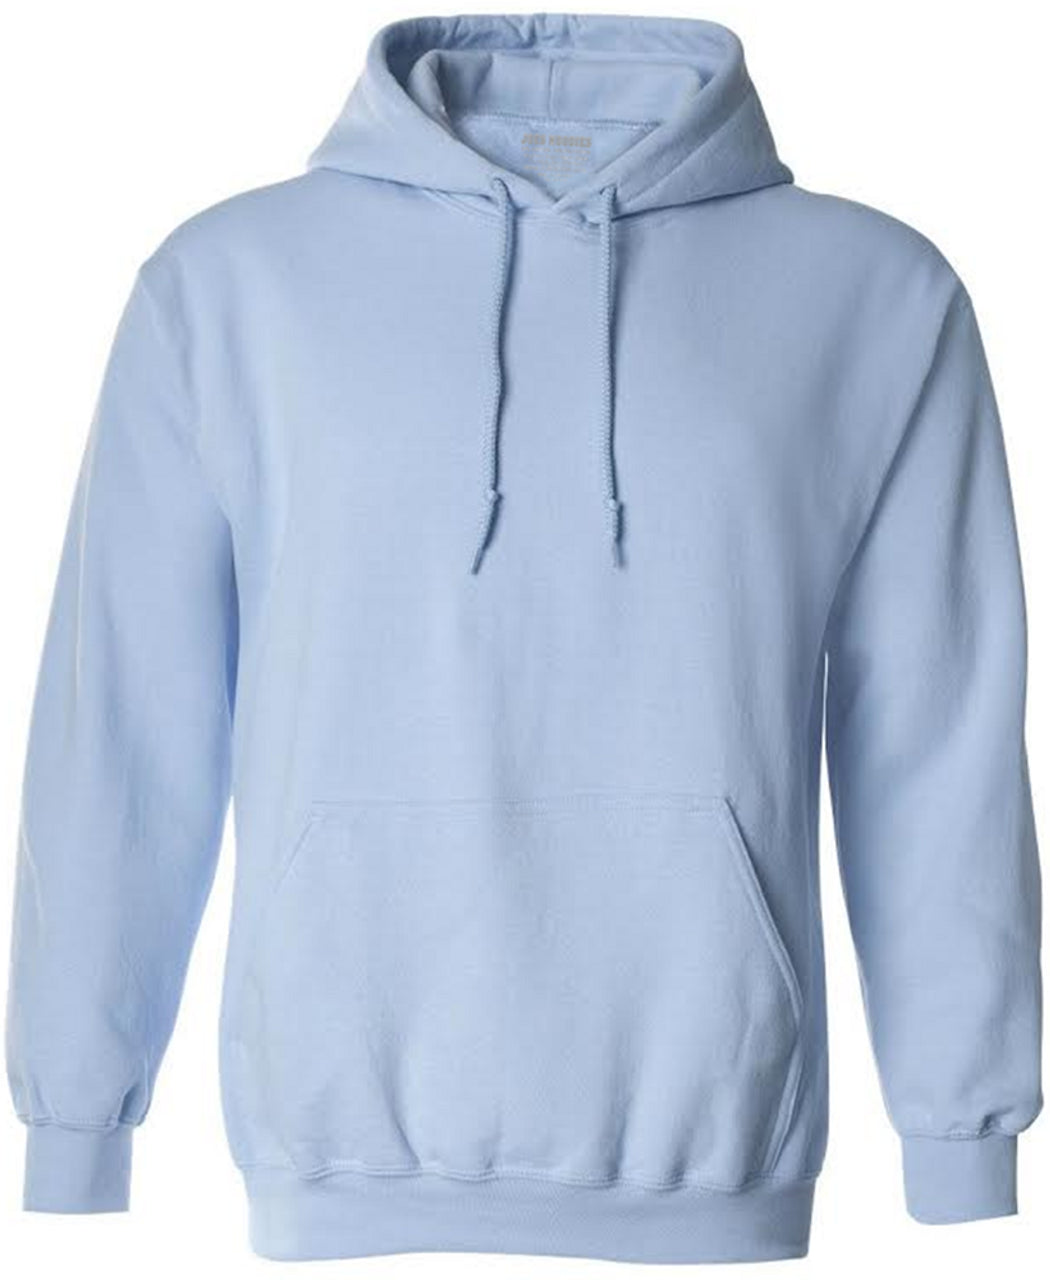 Hoodies For Men's | All For Me Today